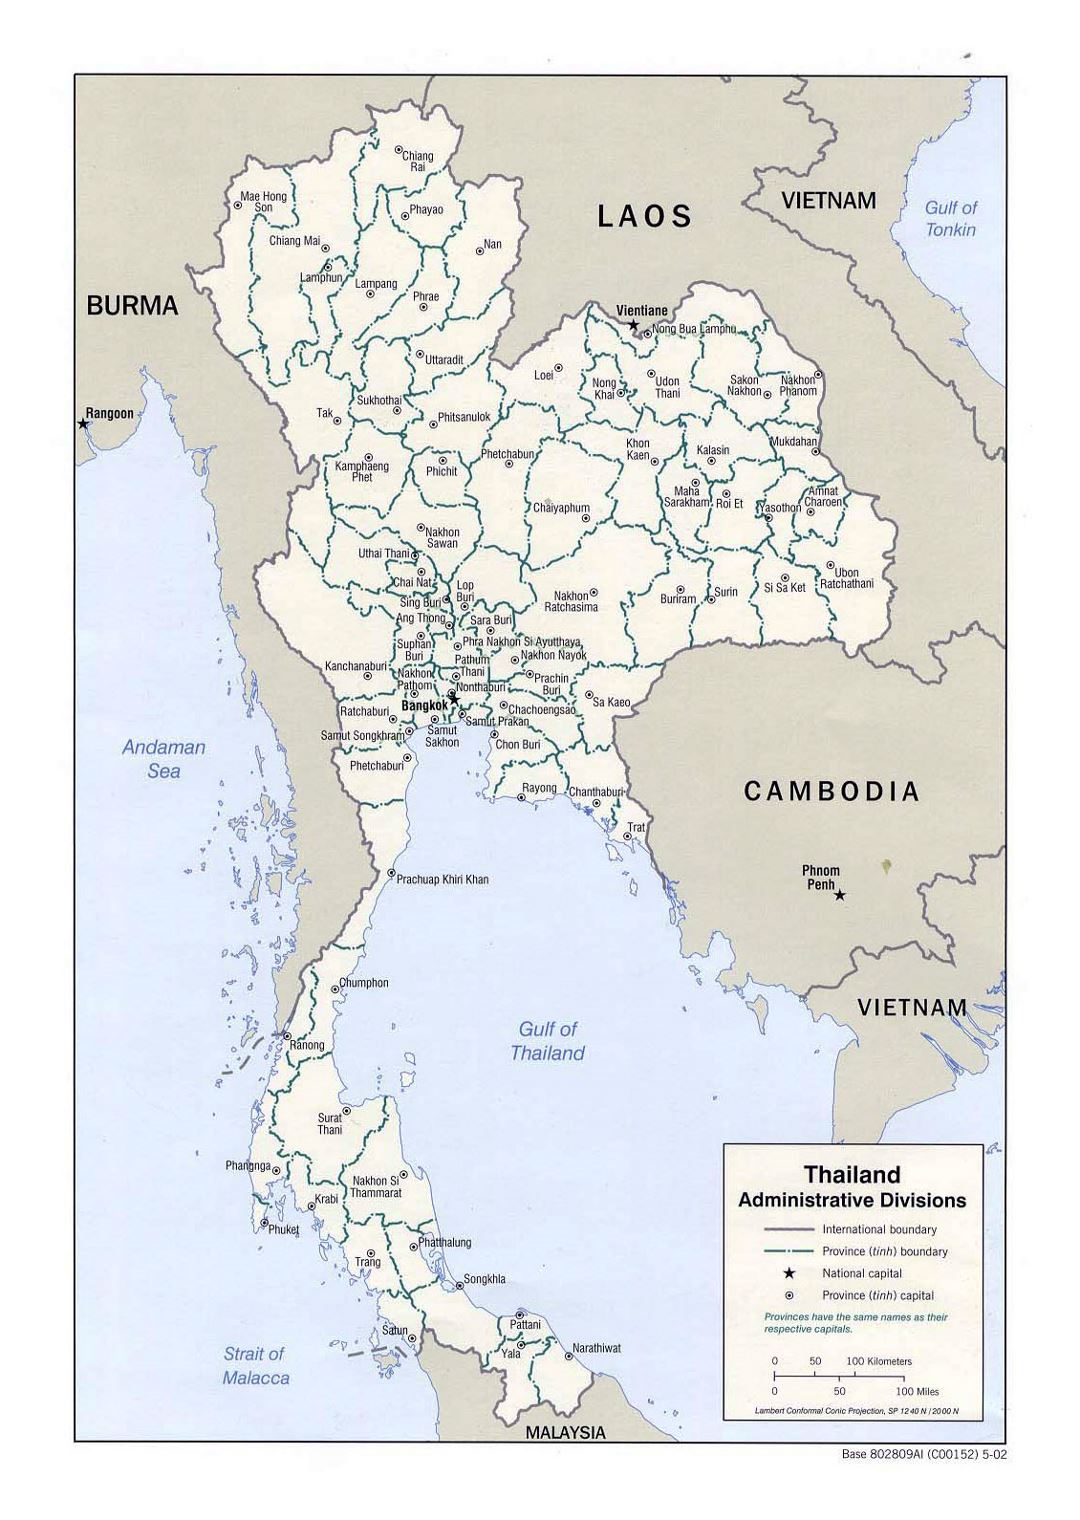 Detailed administrative divisions map of Thailand - 2002